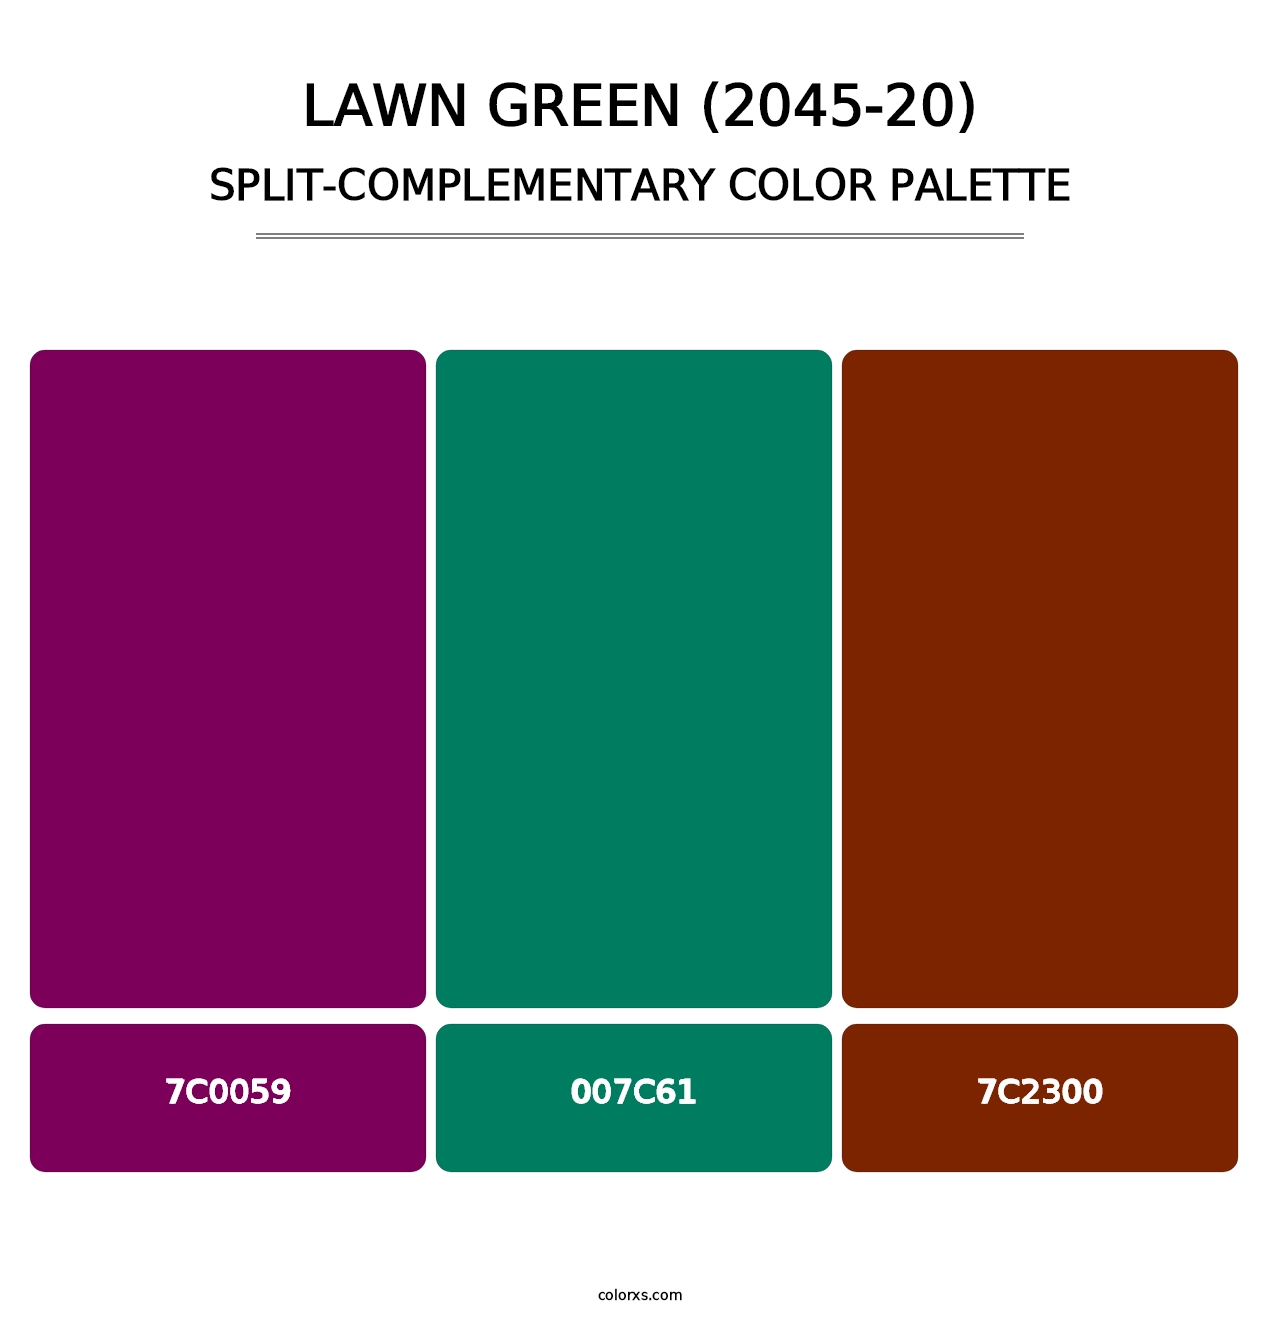 Lawn Green (2045-20) - Split-Complementary Color Palette